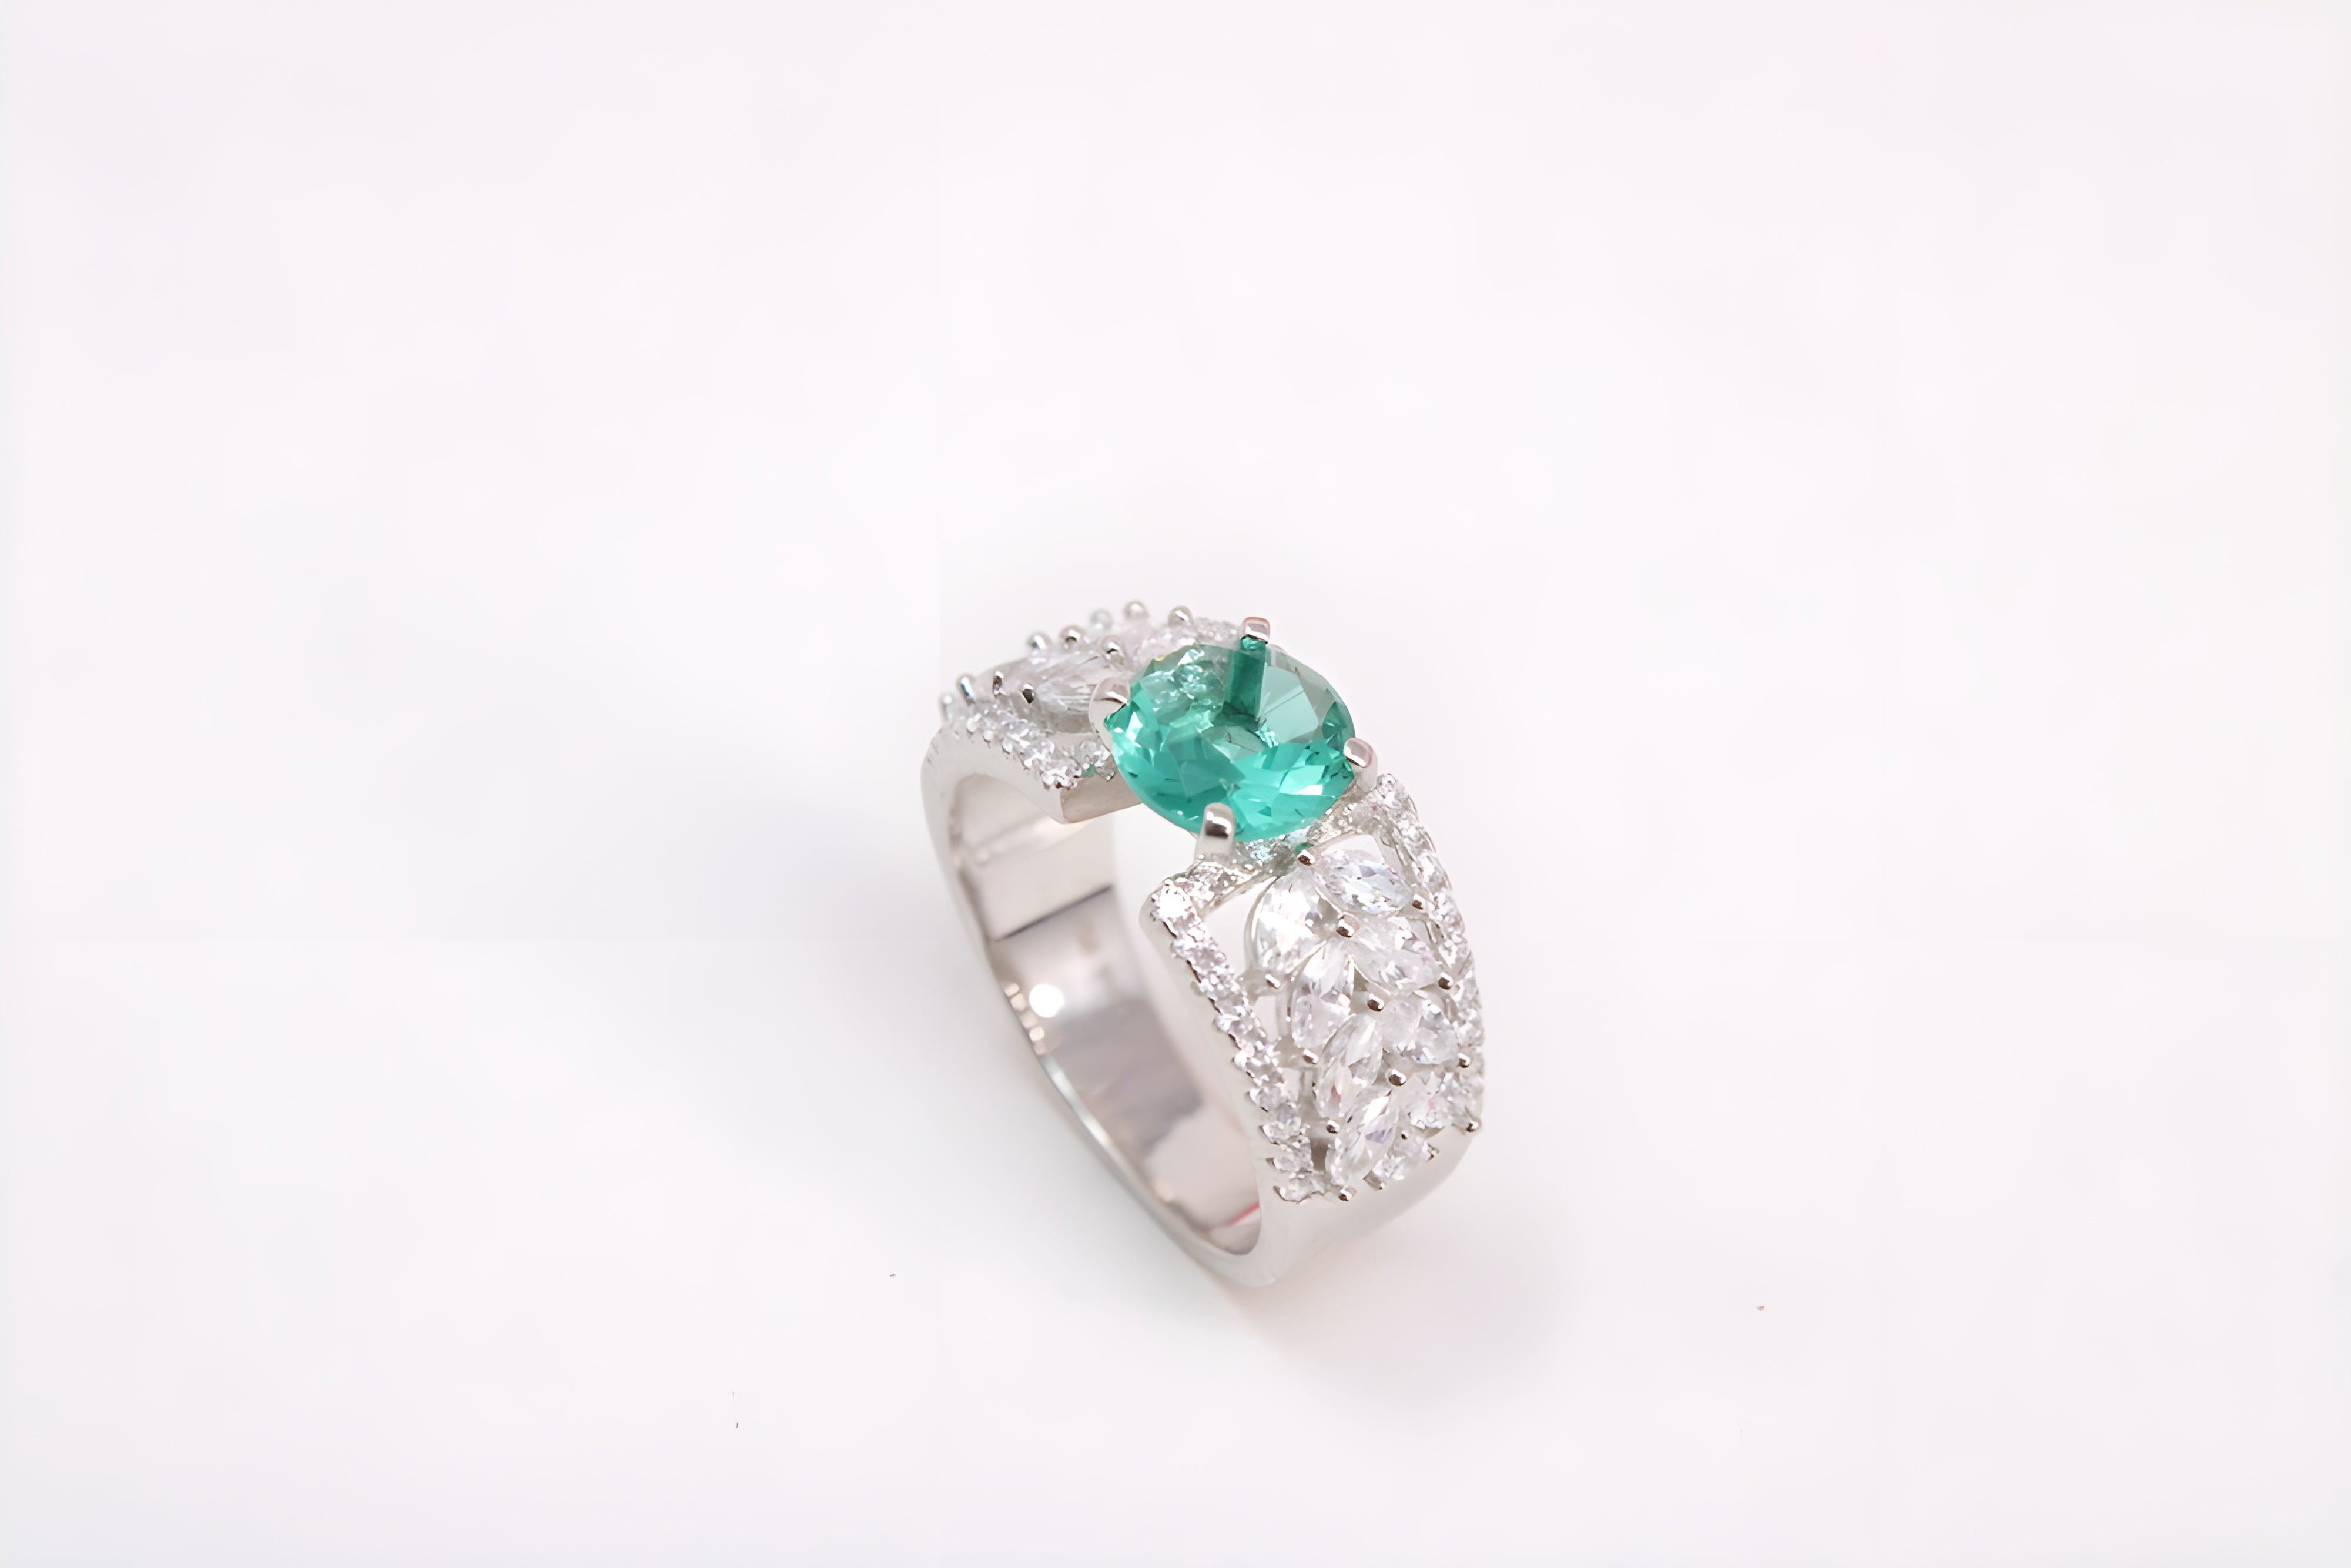 Emerald Glow Sterling Silver Ring